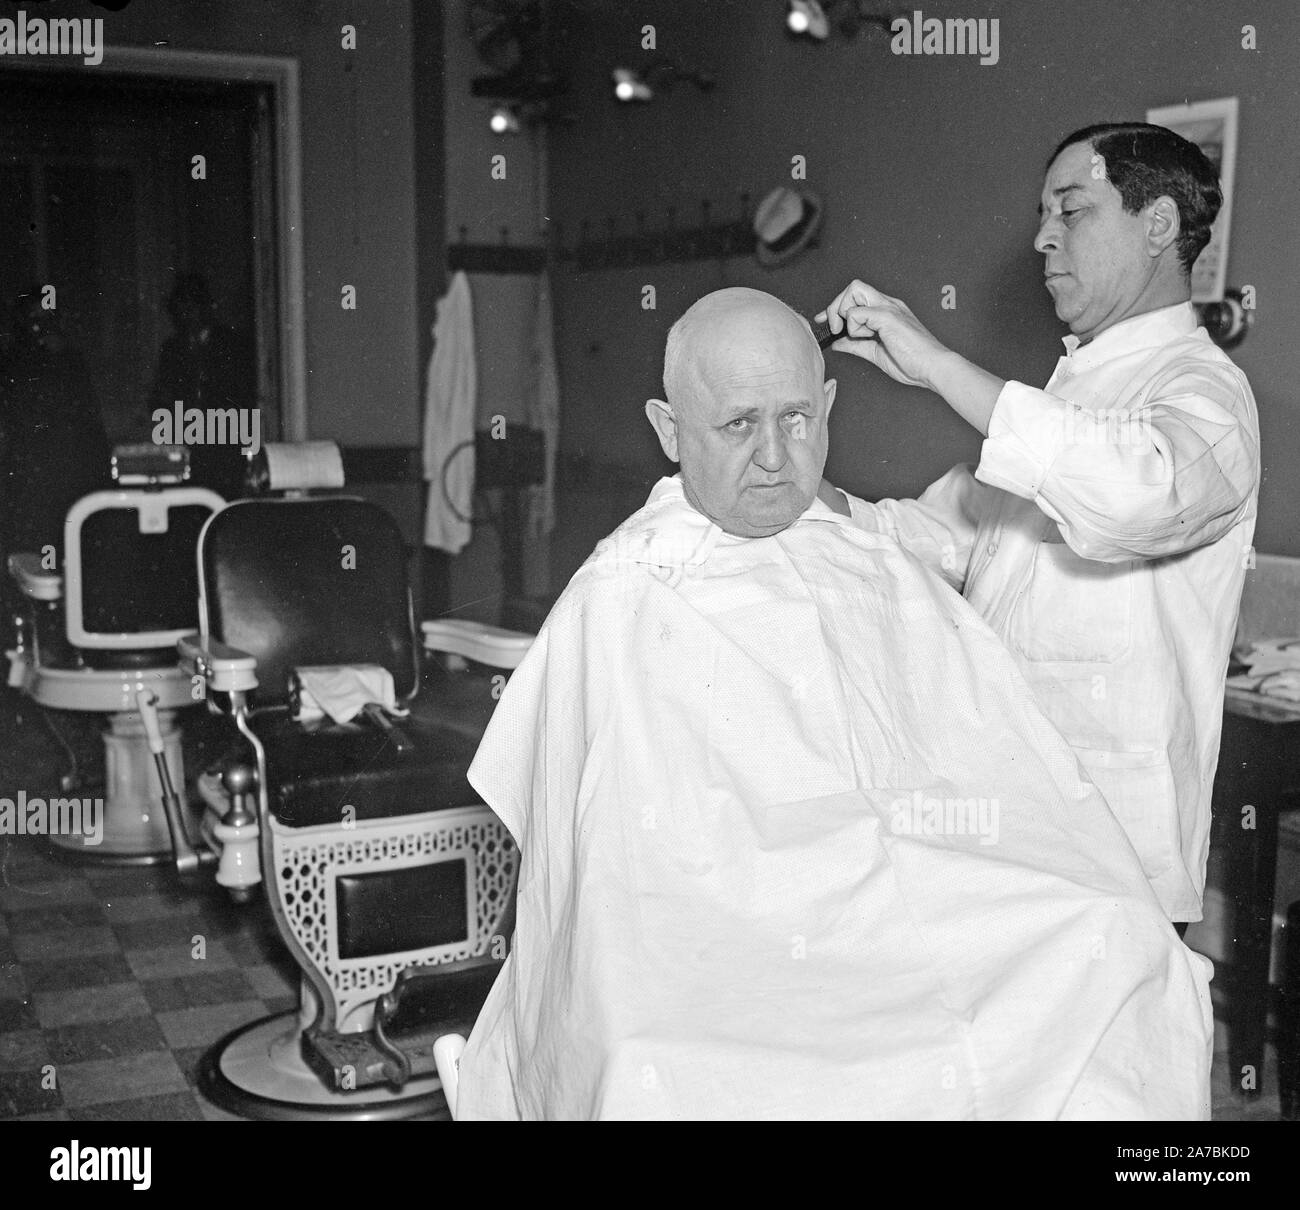 Bald hair cut Black and White Stock Photos & Images - Alamy